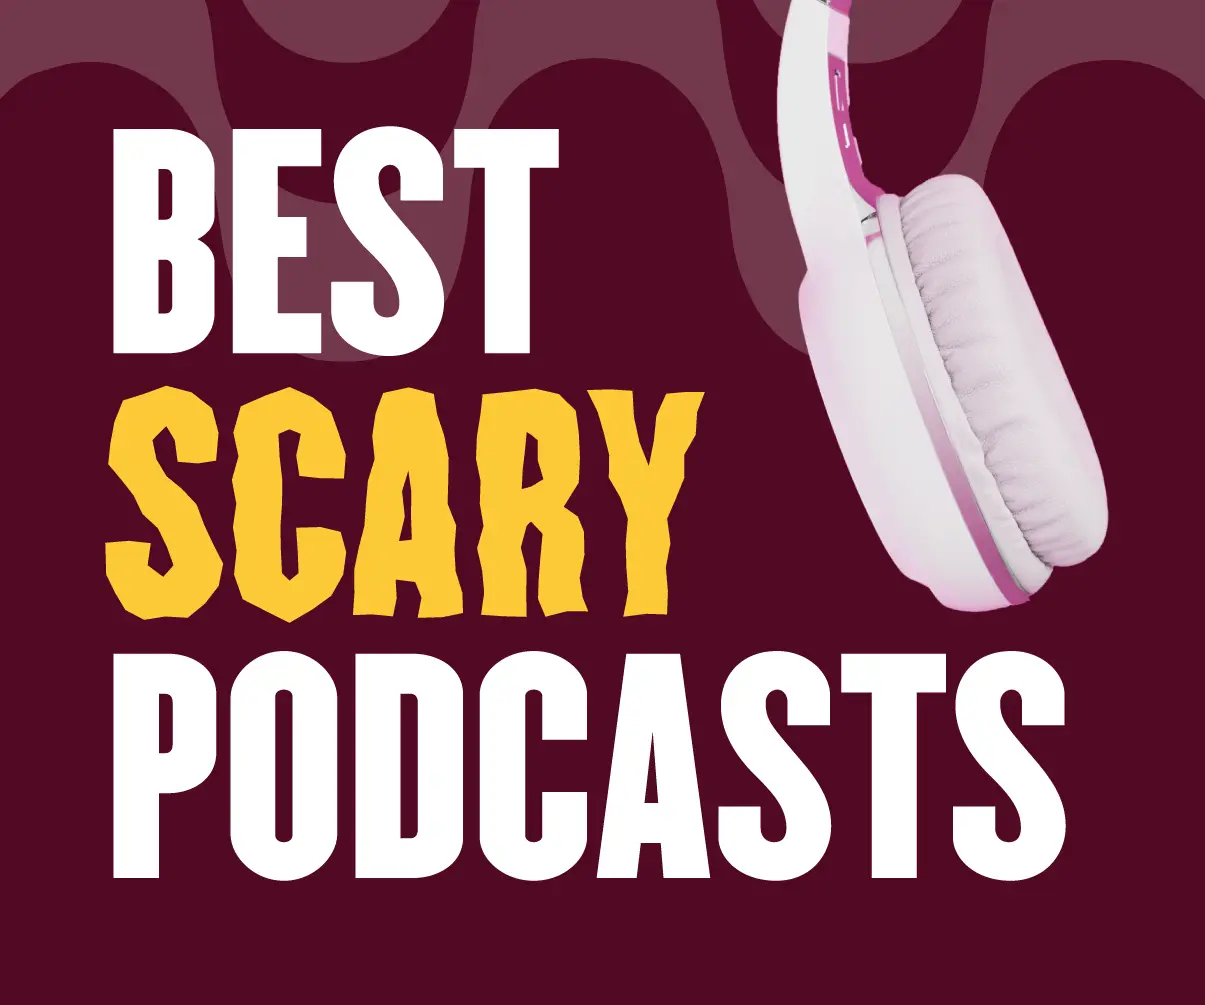 Best Scary Podcasts Top 25 Scariest Podcasts